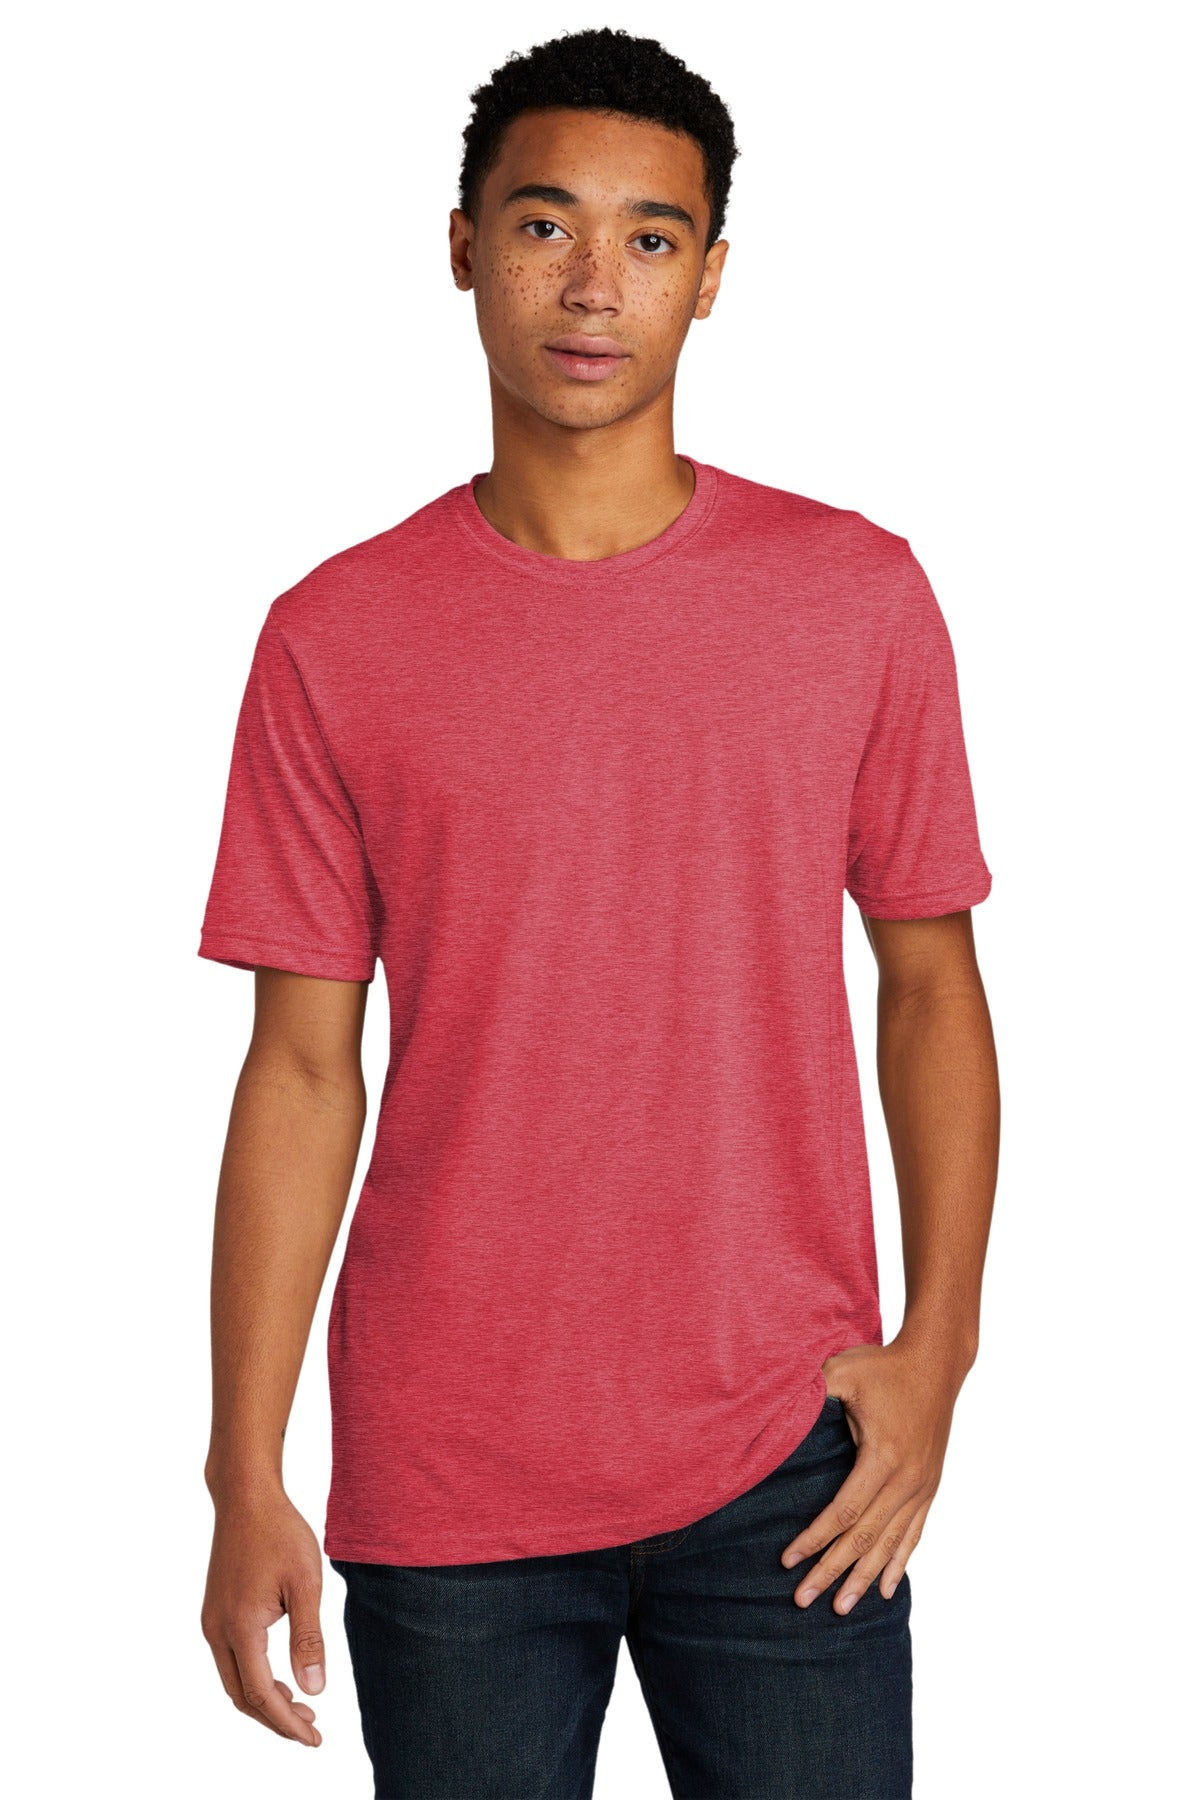 NL6200-Red-XS